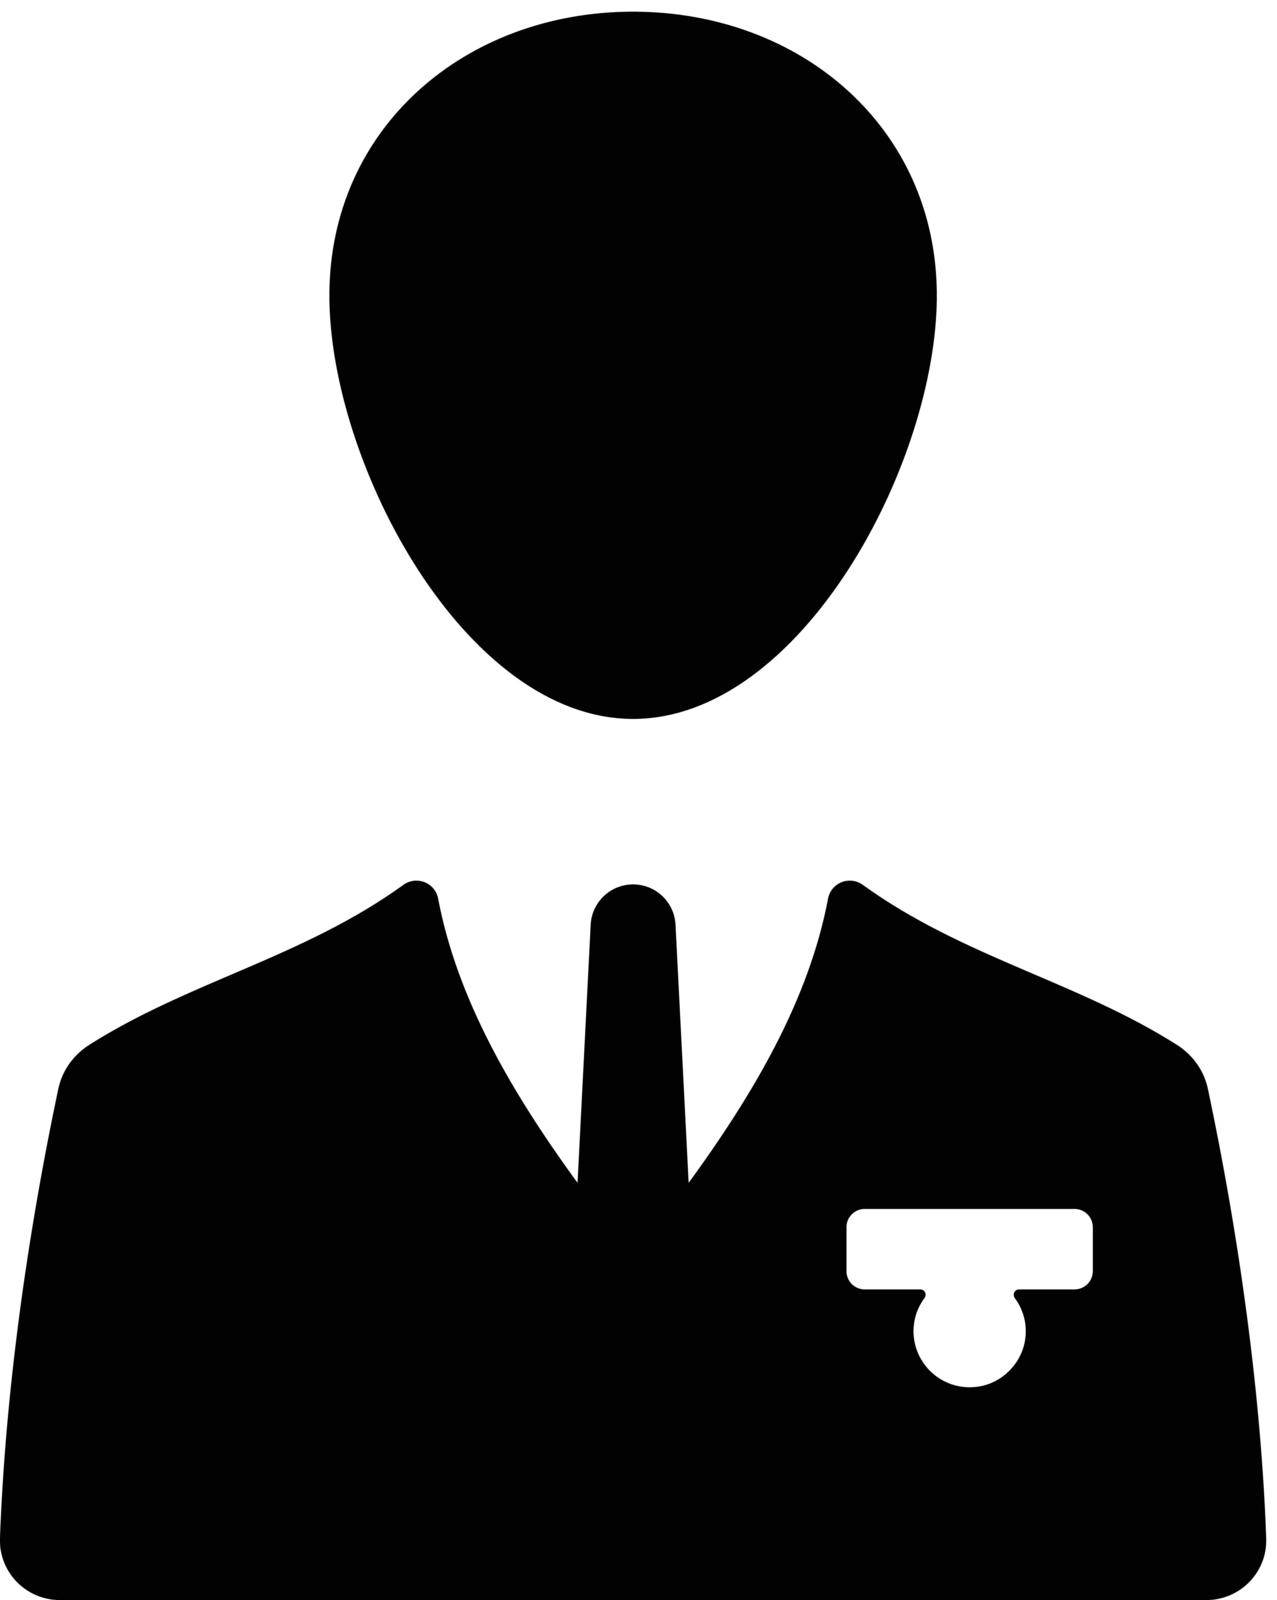 Manager icon - Simple vector illustration